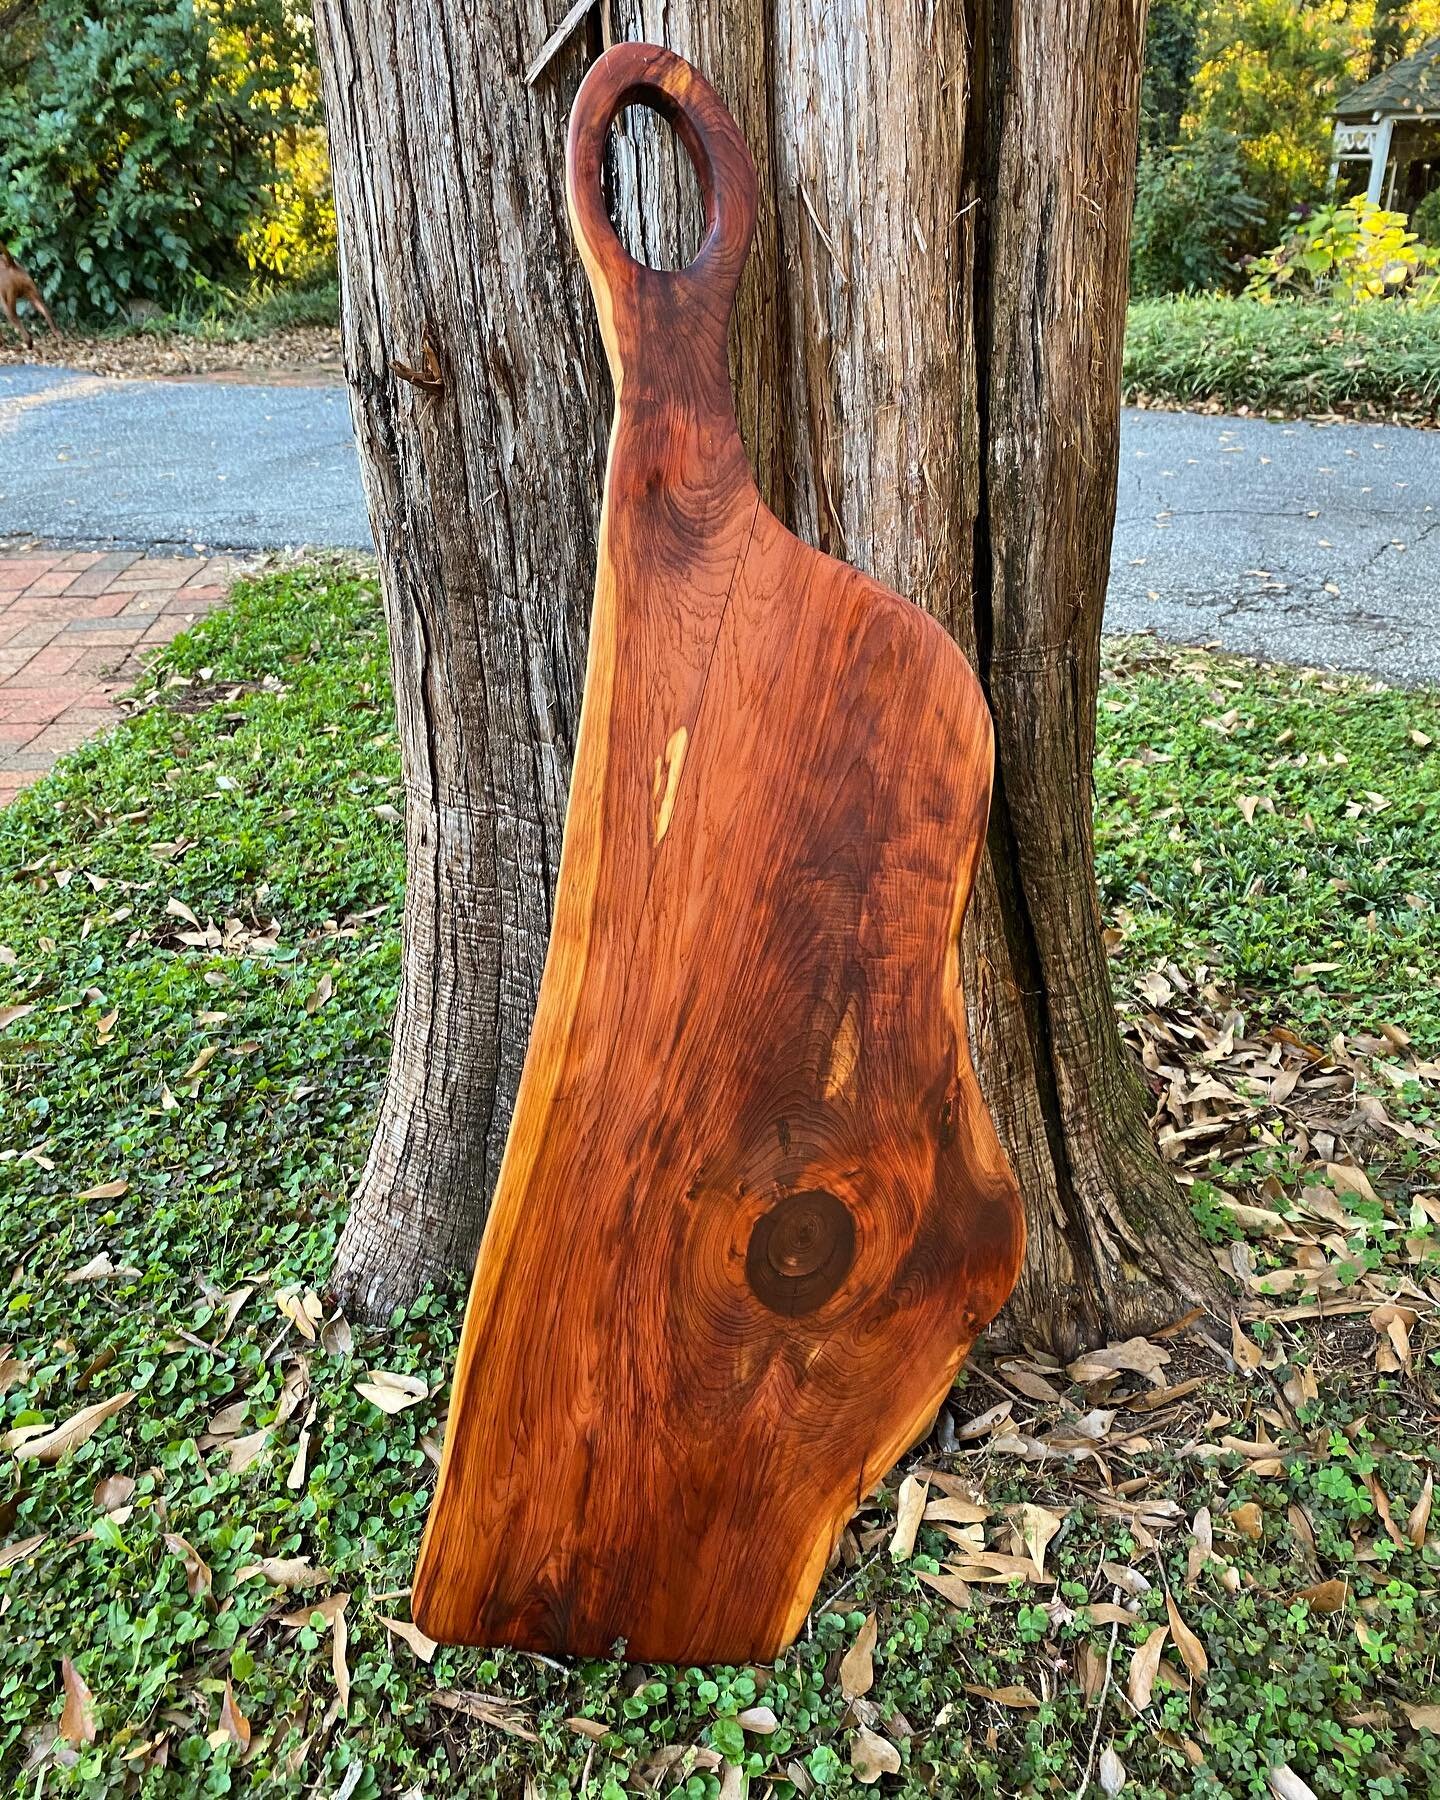 Another charcuterie is done and has a new home. Liking the handle shape combined with the live edge. 

📍Cedar charcuterie board 
🌲 Live edge 
💭 Custom sizes and shapes available
🖥 Message me for ordering info